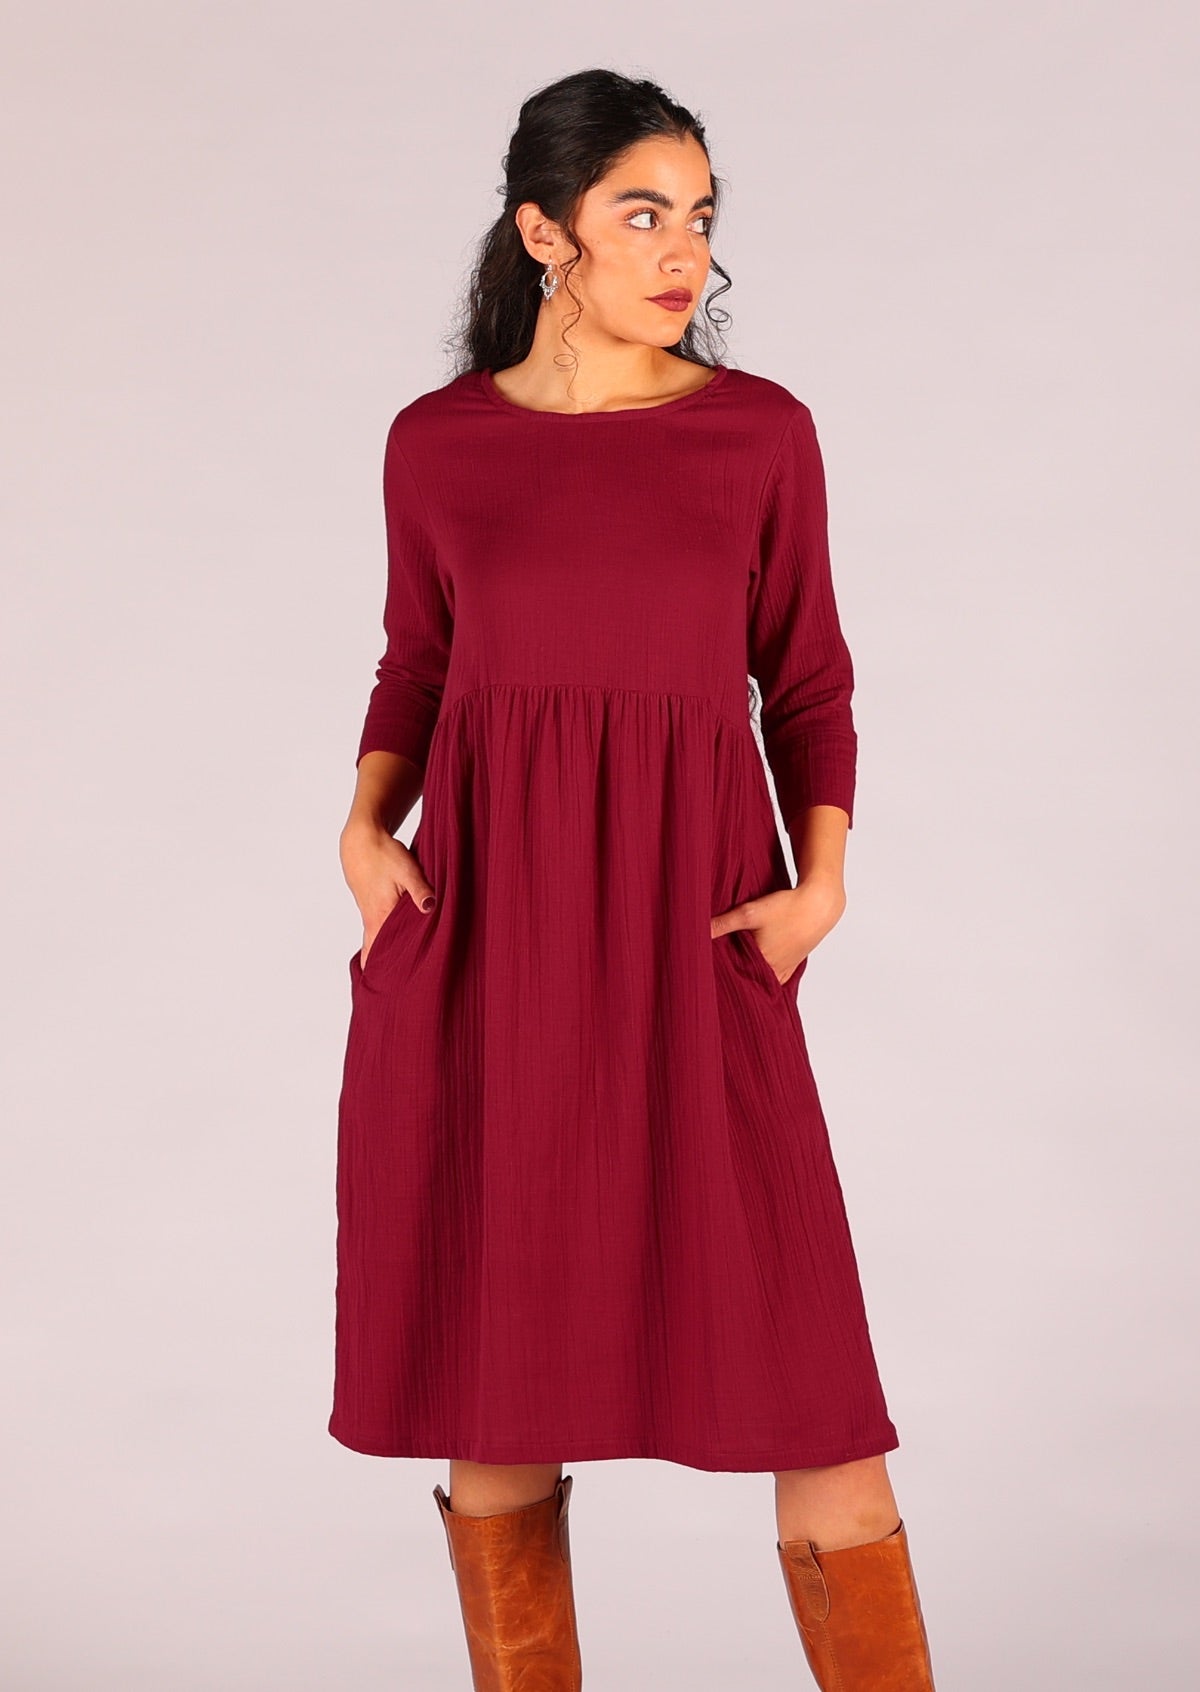 Deep red cotton gauze relaxed fit dress with 3/4 sleeves and hidden side pockets